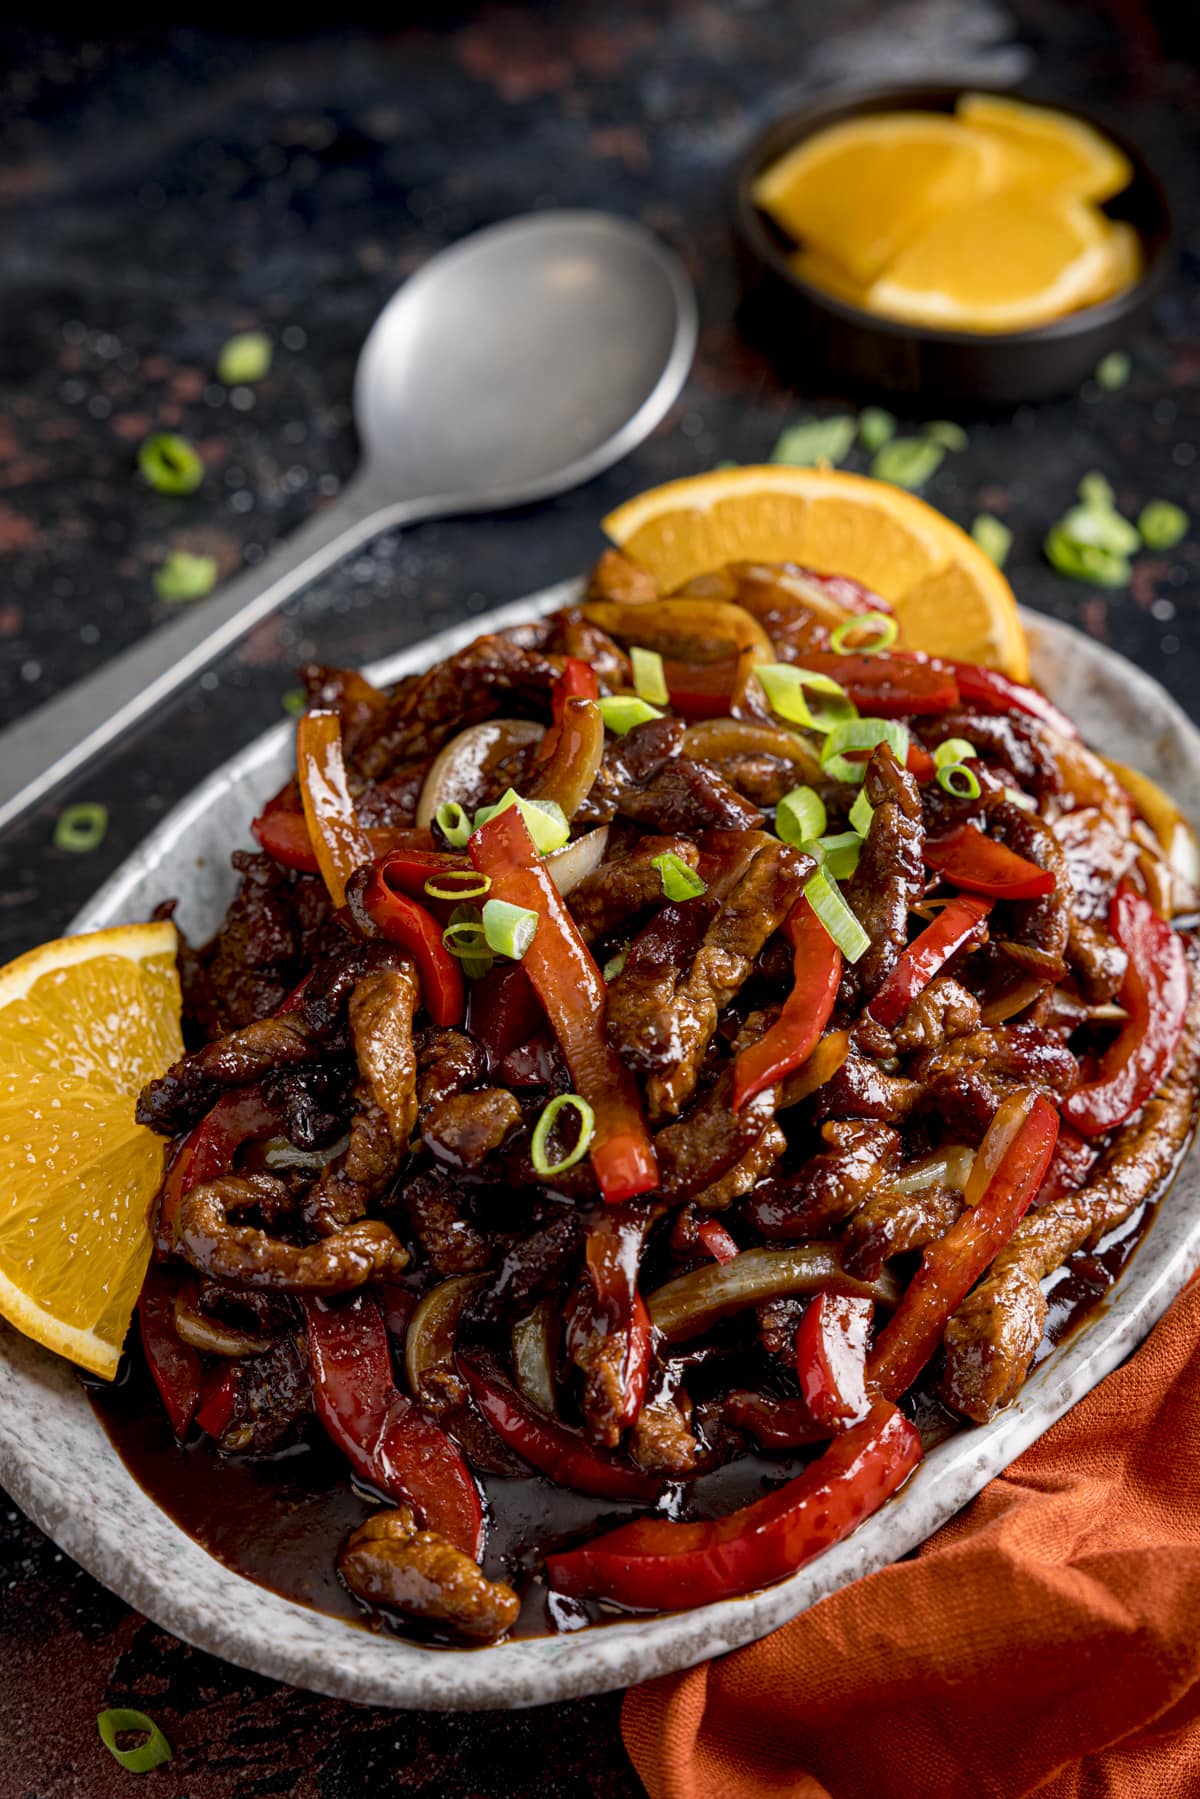 Crispy orange beef with peppers and onions on a shallow oval plate. There are slices of orange and spring onions scattered around and a spoon in the background.